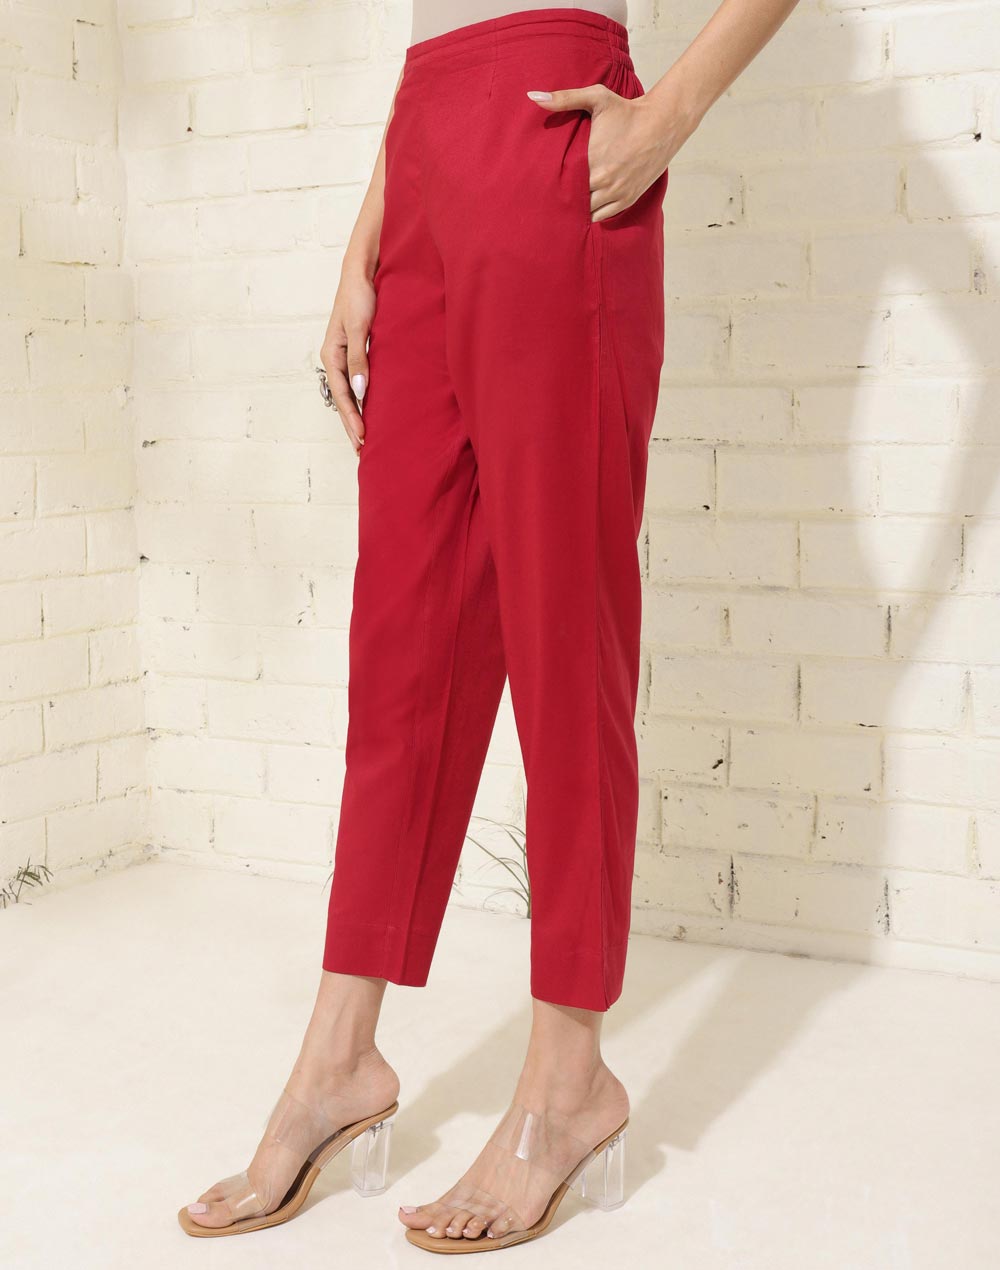 Buy Casual Pants for Women, Casual Trousers for Women Online at Fabindia